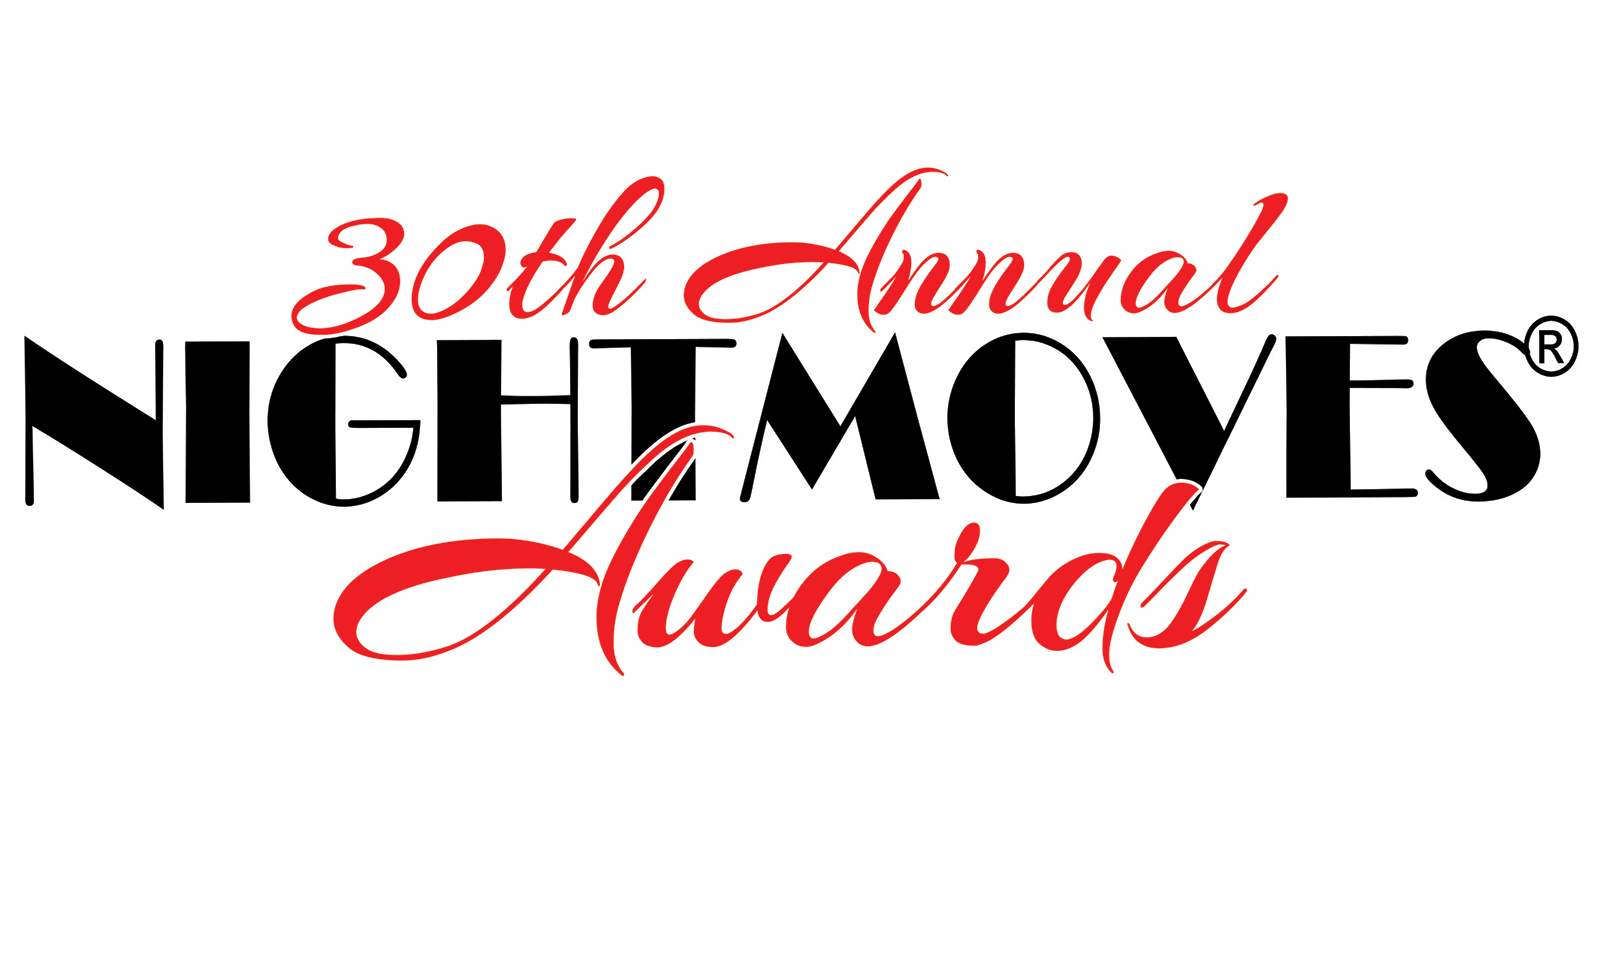 Winners of 30th Annual NightMoves Awards Announced